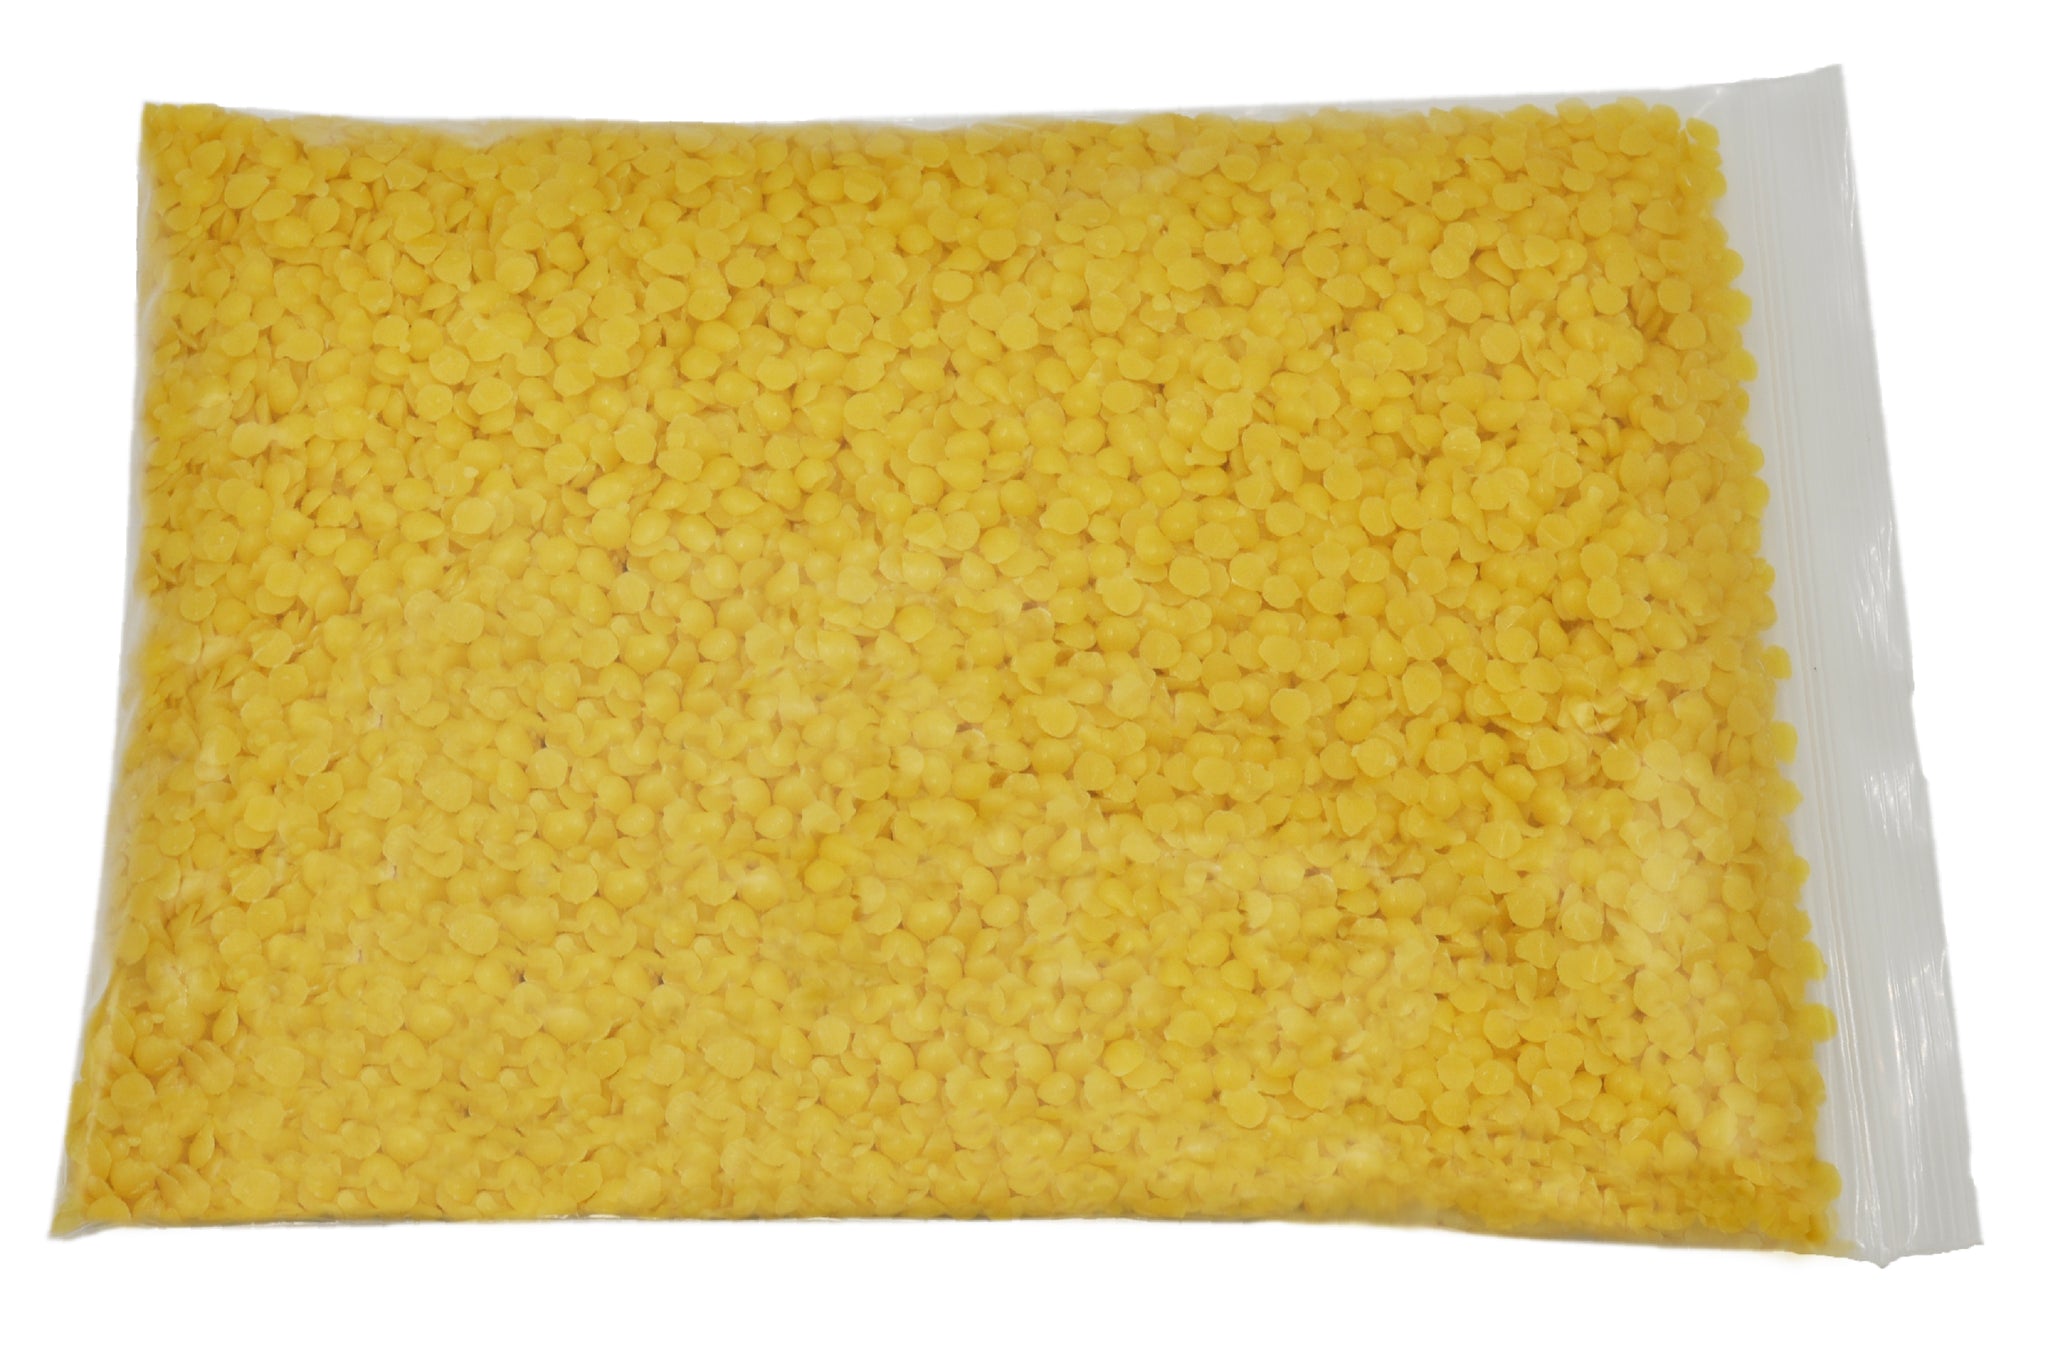  B and Q 1 LB Pure Natural Yellow Beeswax Pellets for